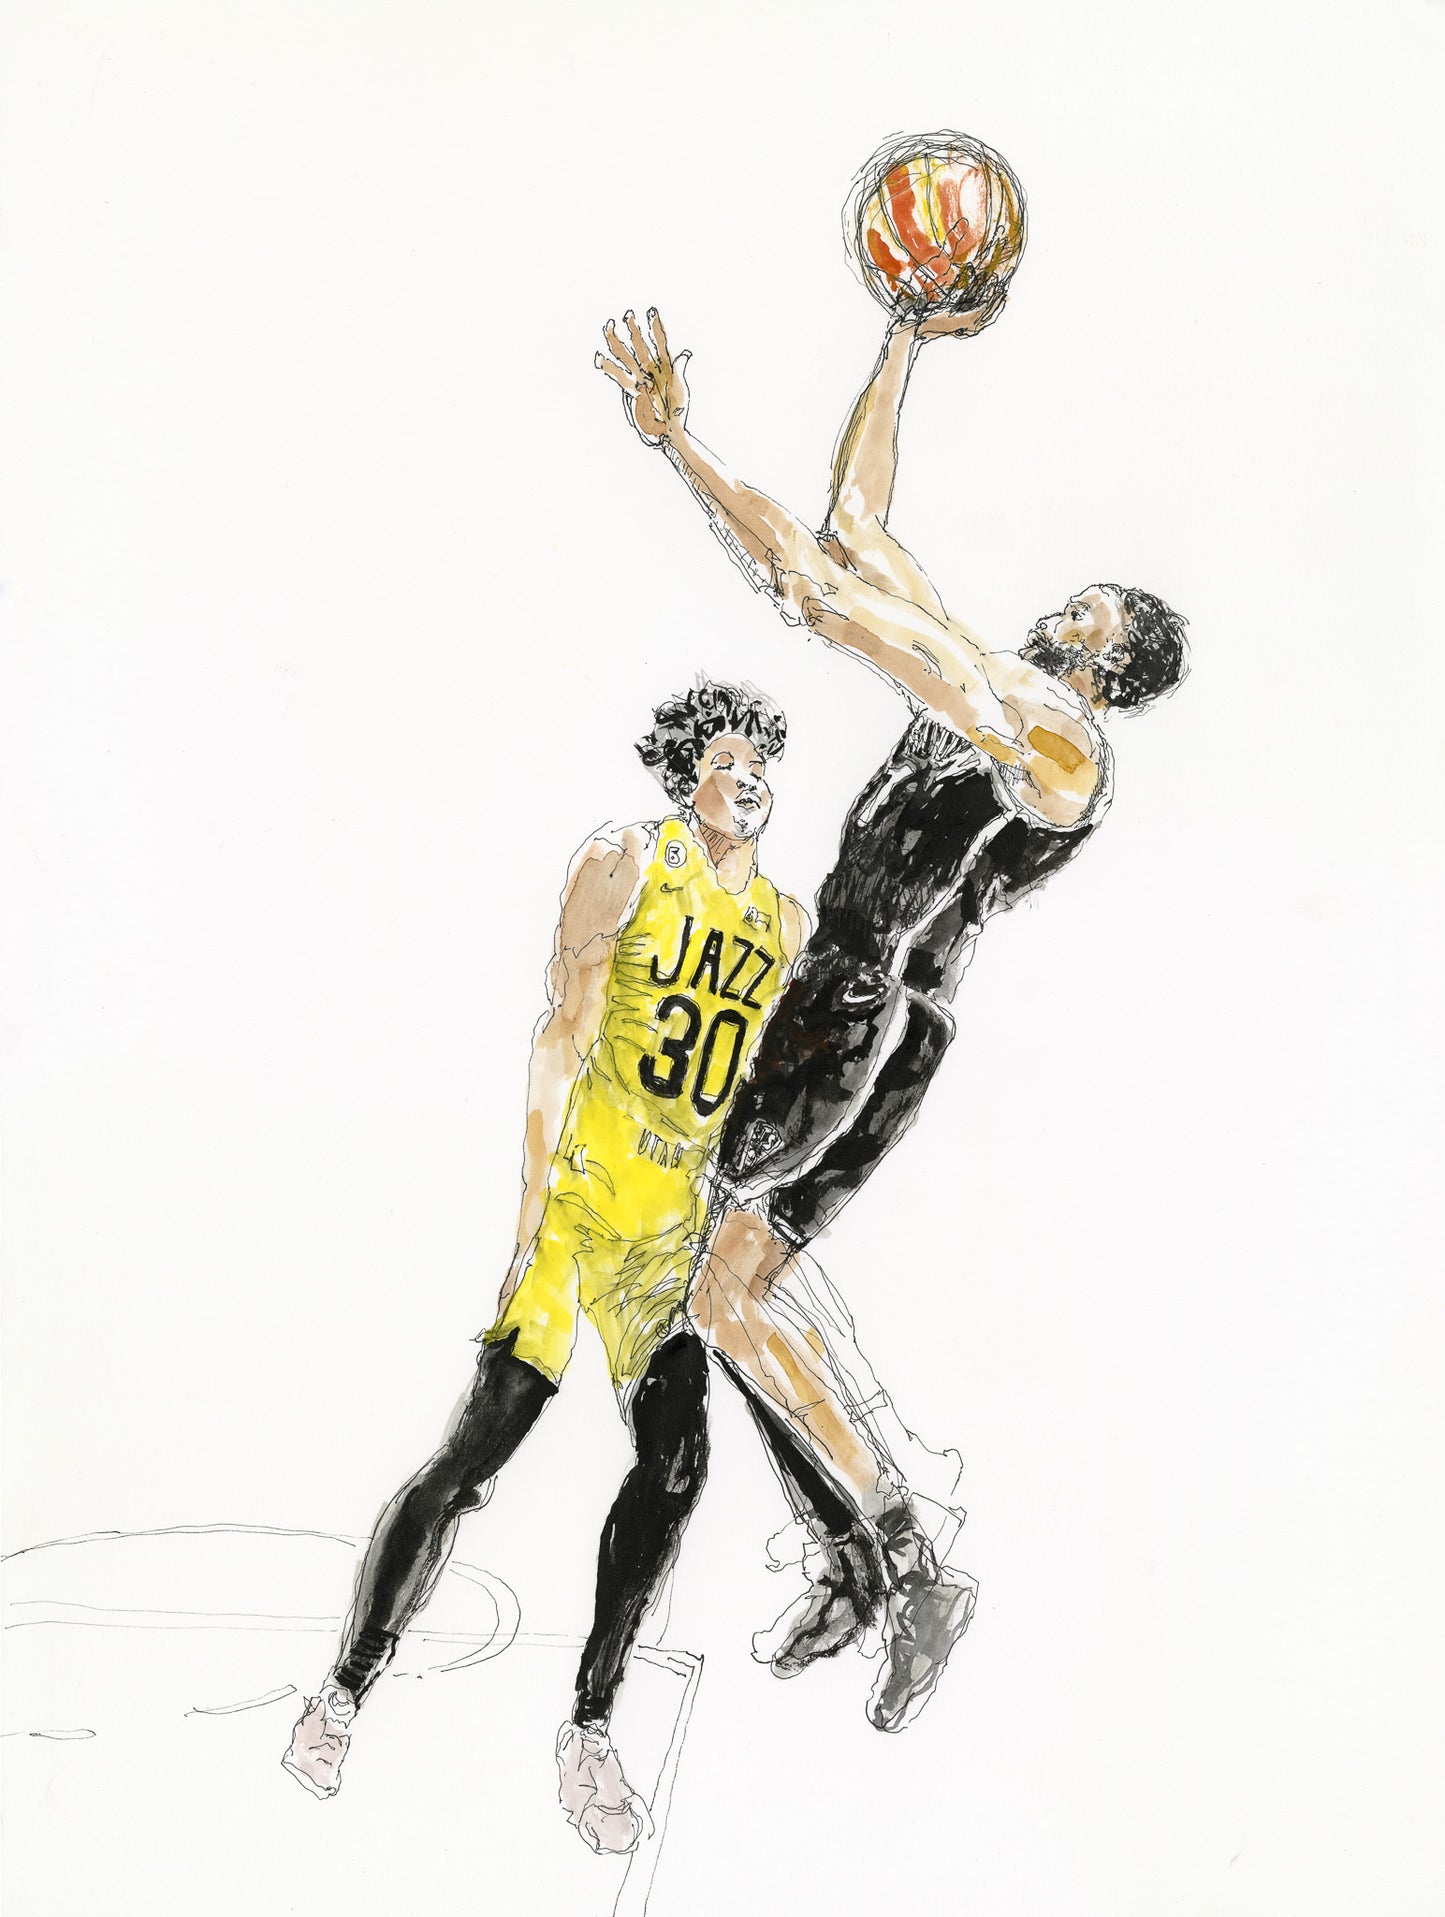 Bridges over Agbaji - Drawing of the Game - Nets/Jazz